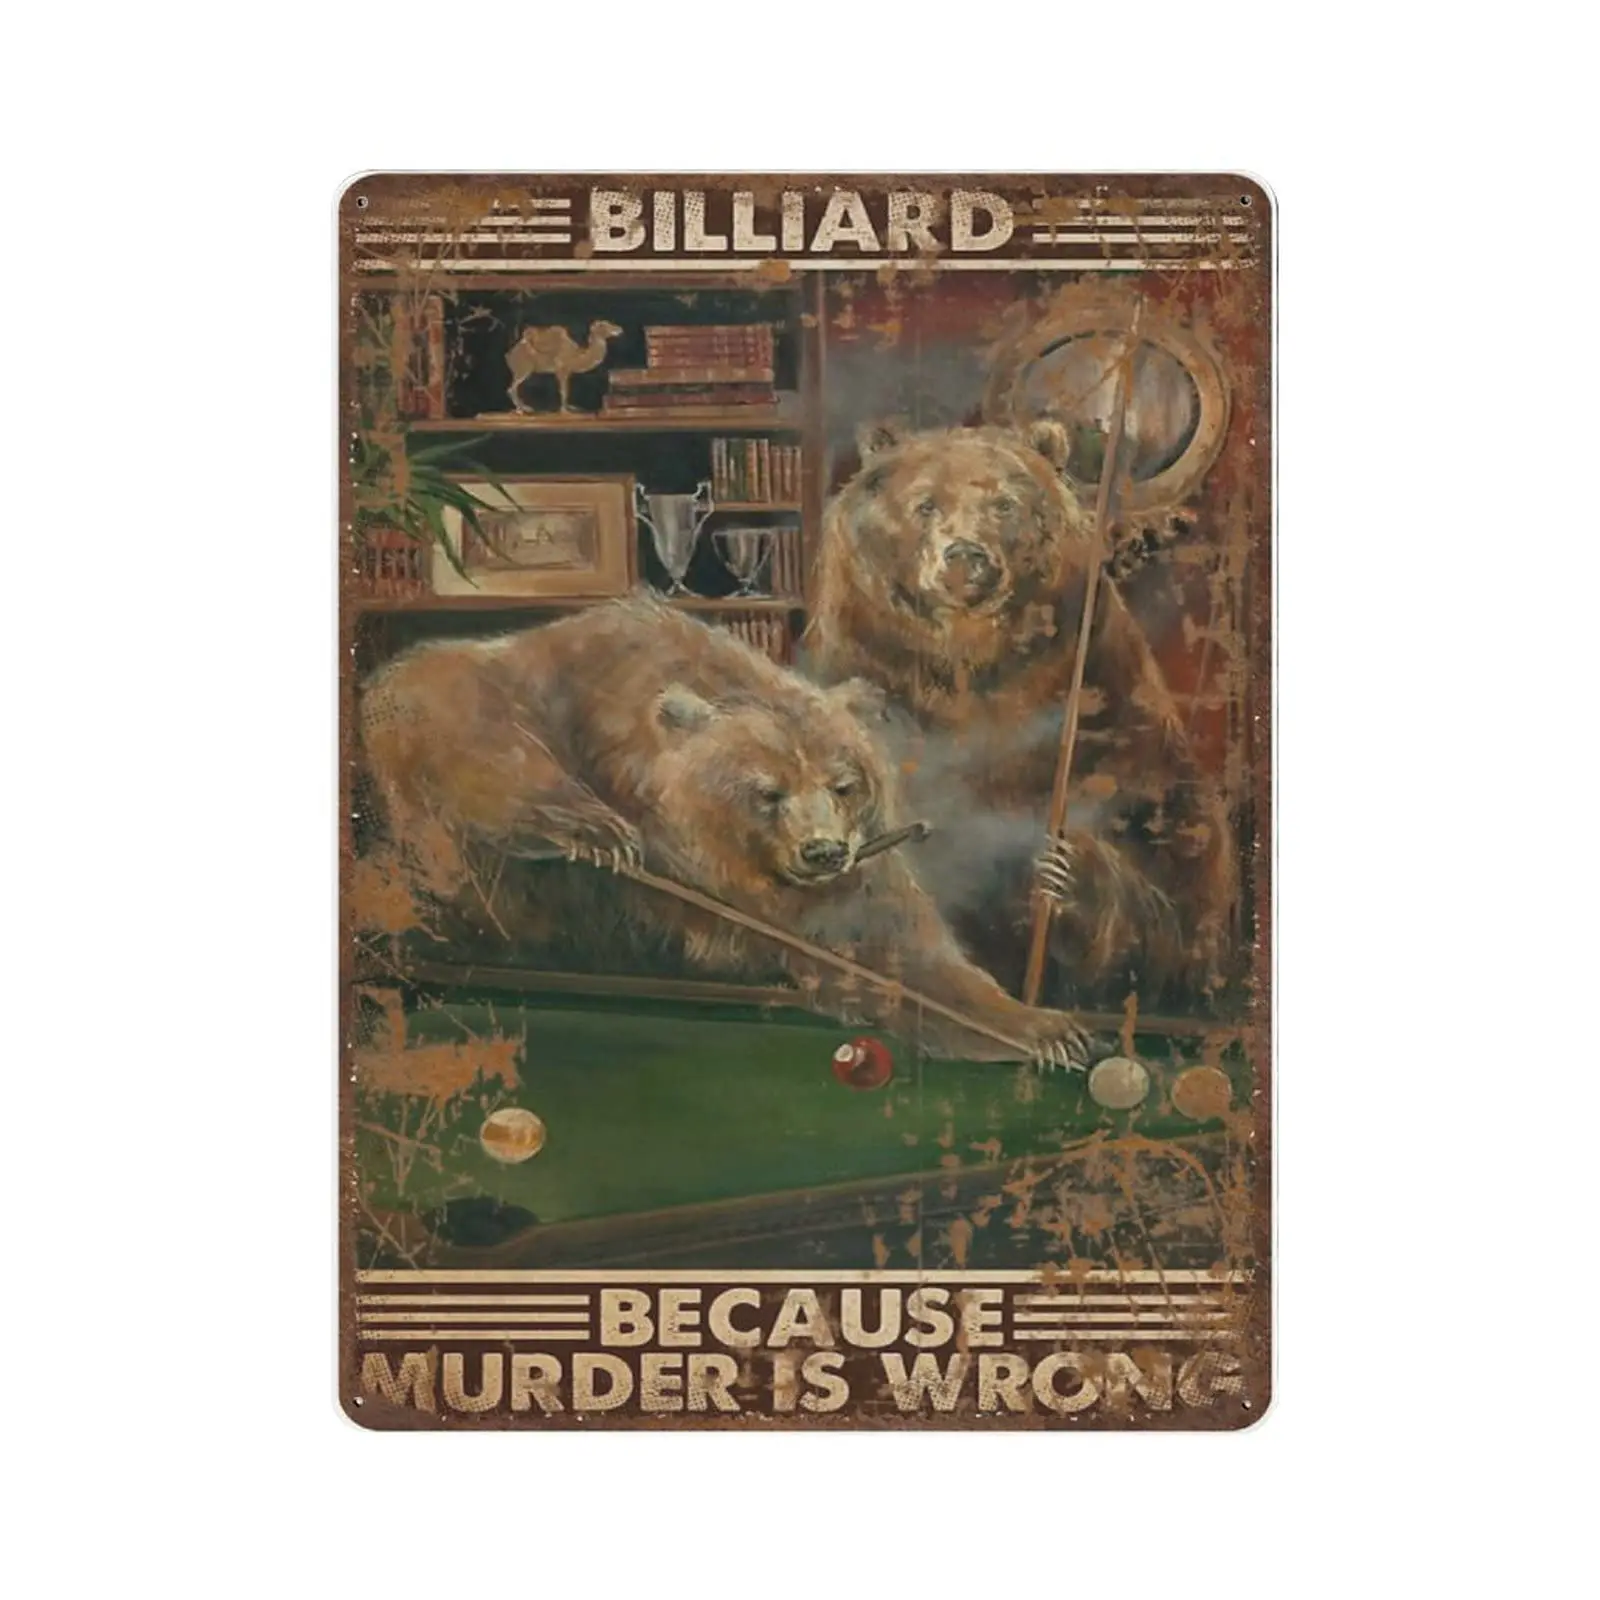 

Antique Durable Thick Metal Sign,Billiard Because Murder is Wrong Tin Sig,Vintage Wall Decor，Novelty Signs for Home Kitchen Cafe